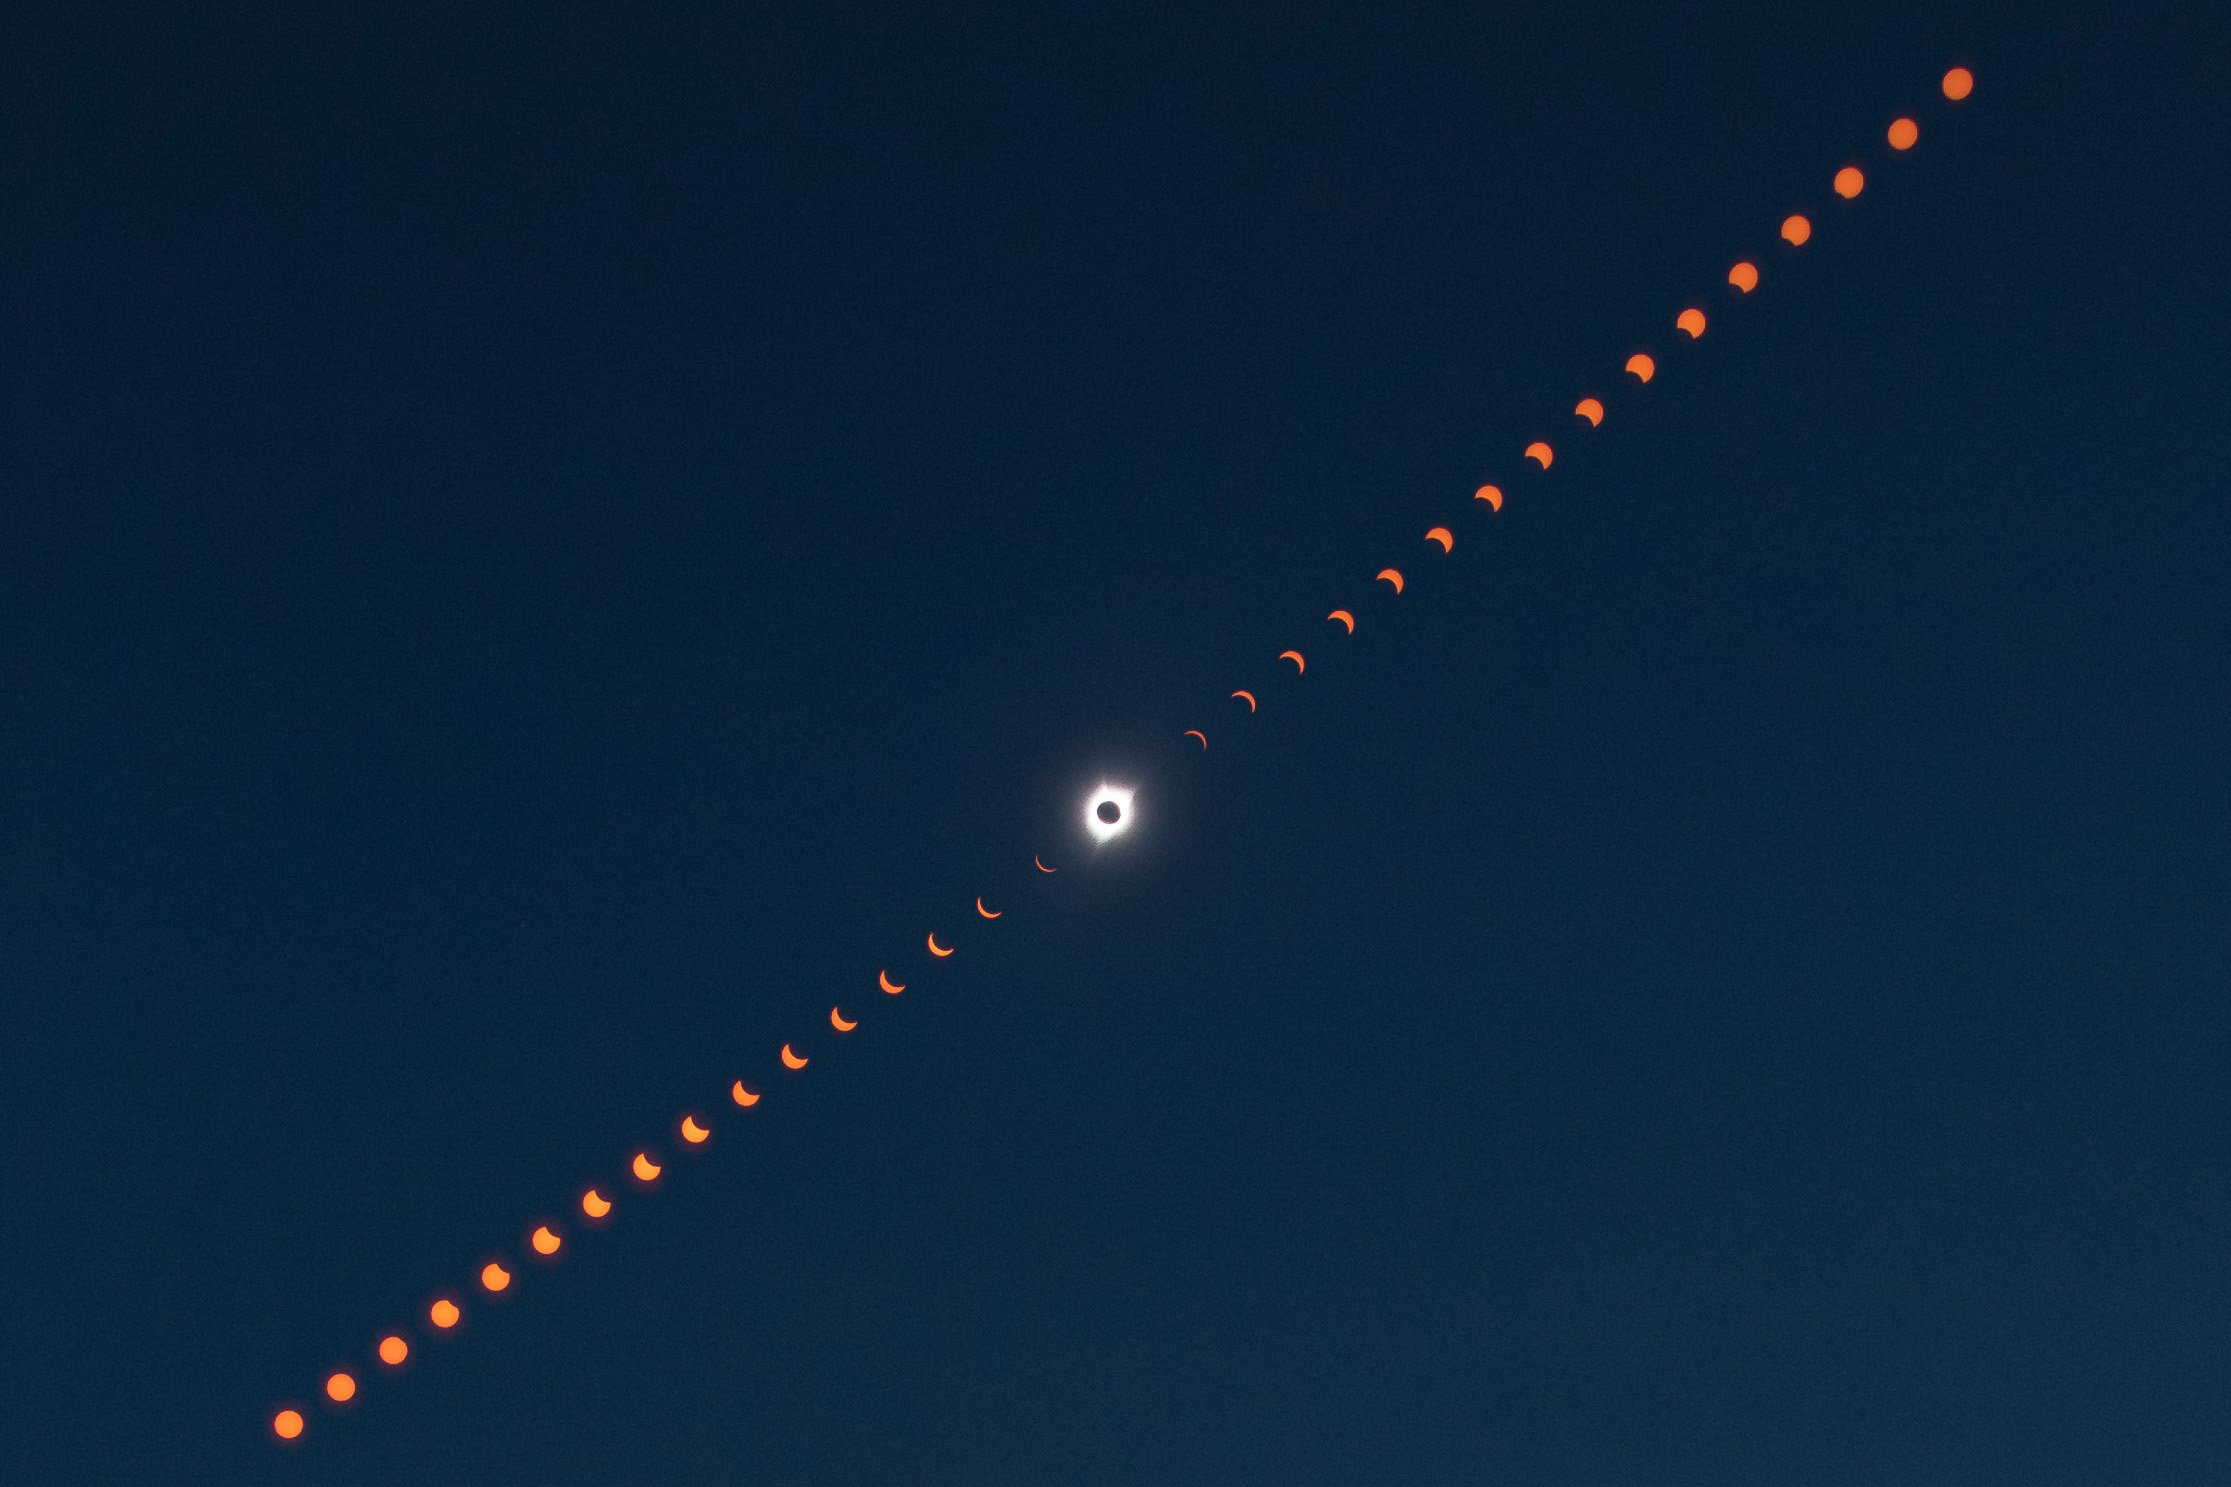 A composite image showing many phases of the eclipse with totality strikingly highlighted in the center